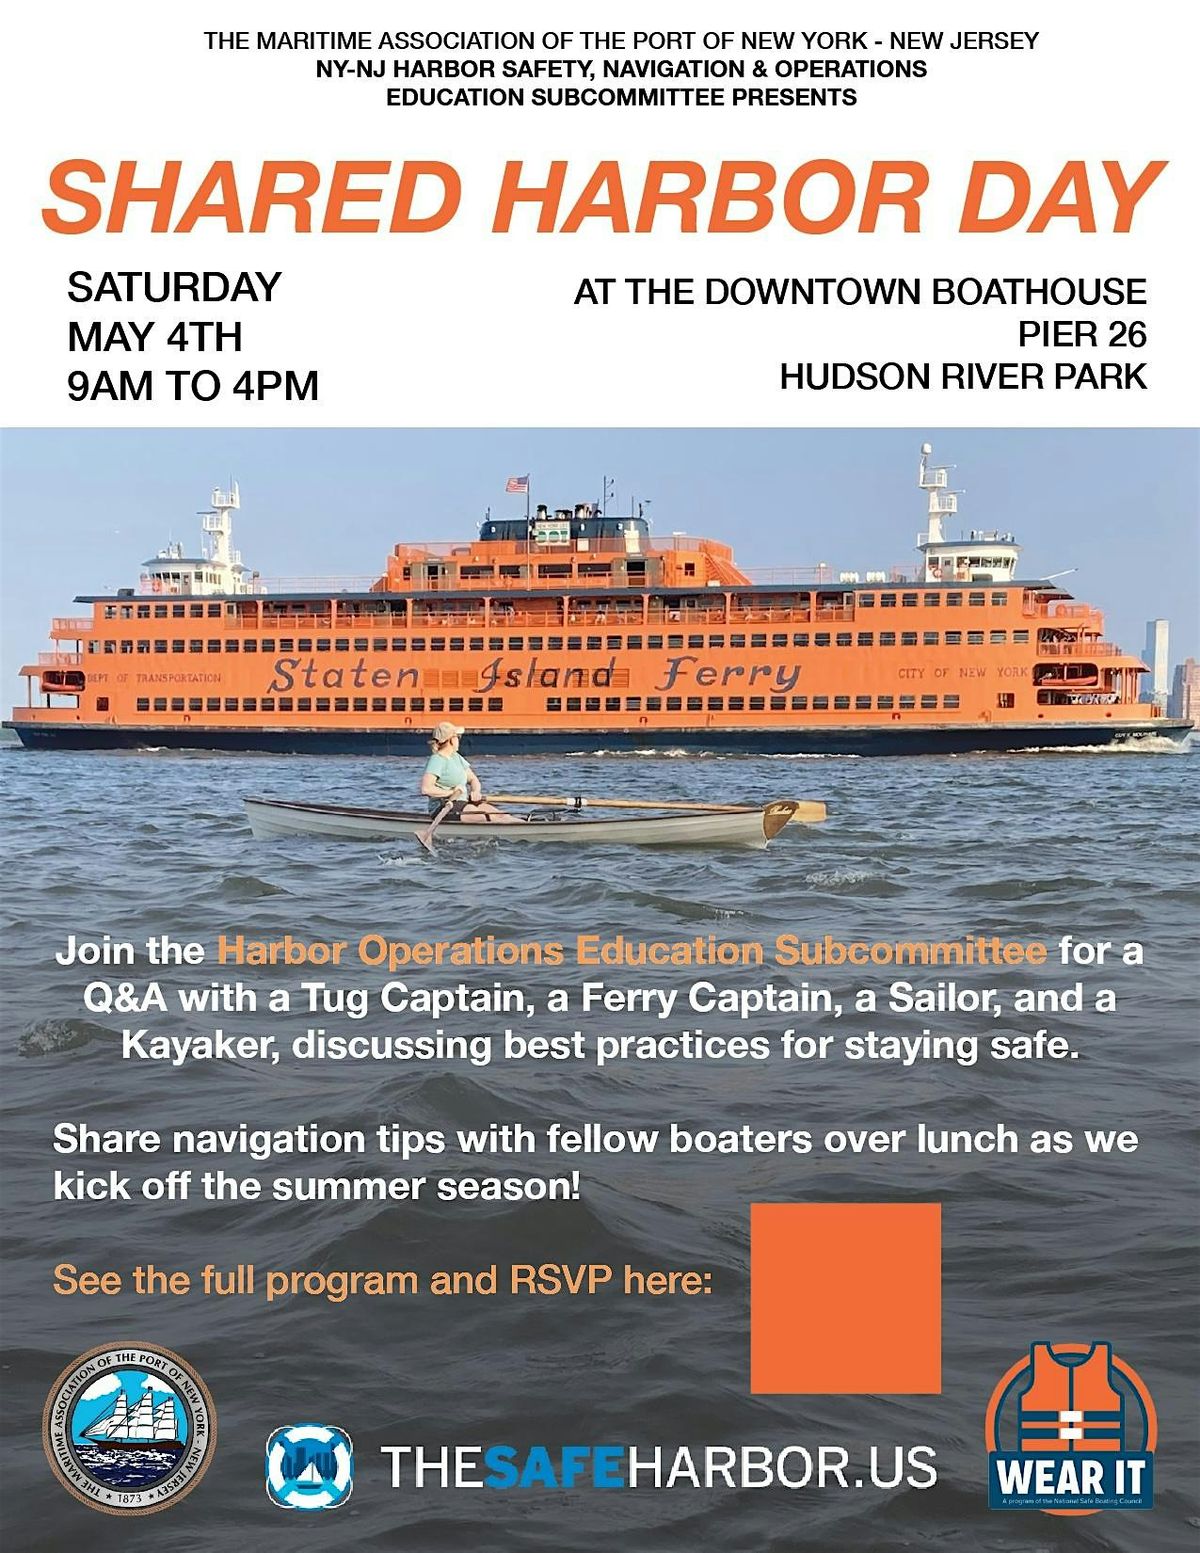 Shared Harbor Day